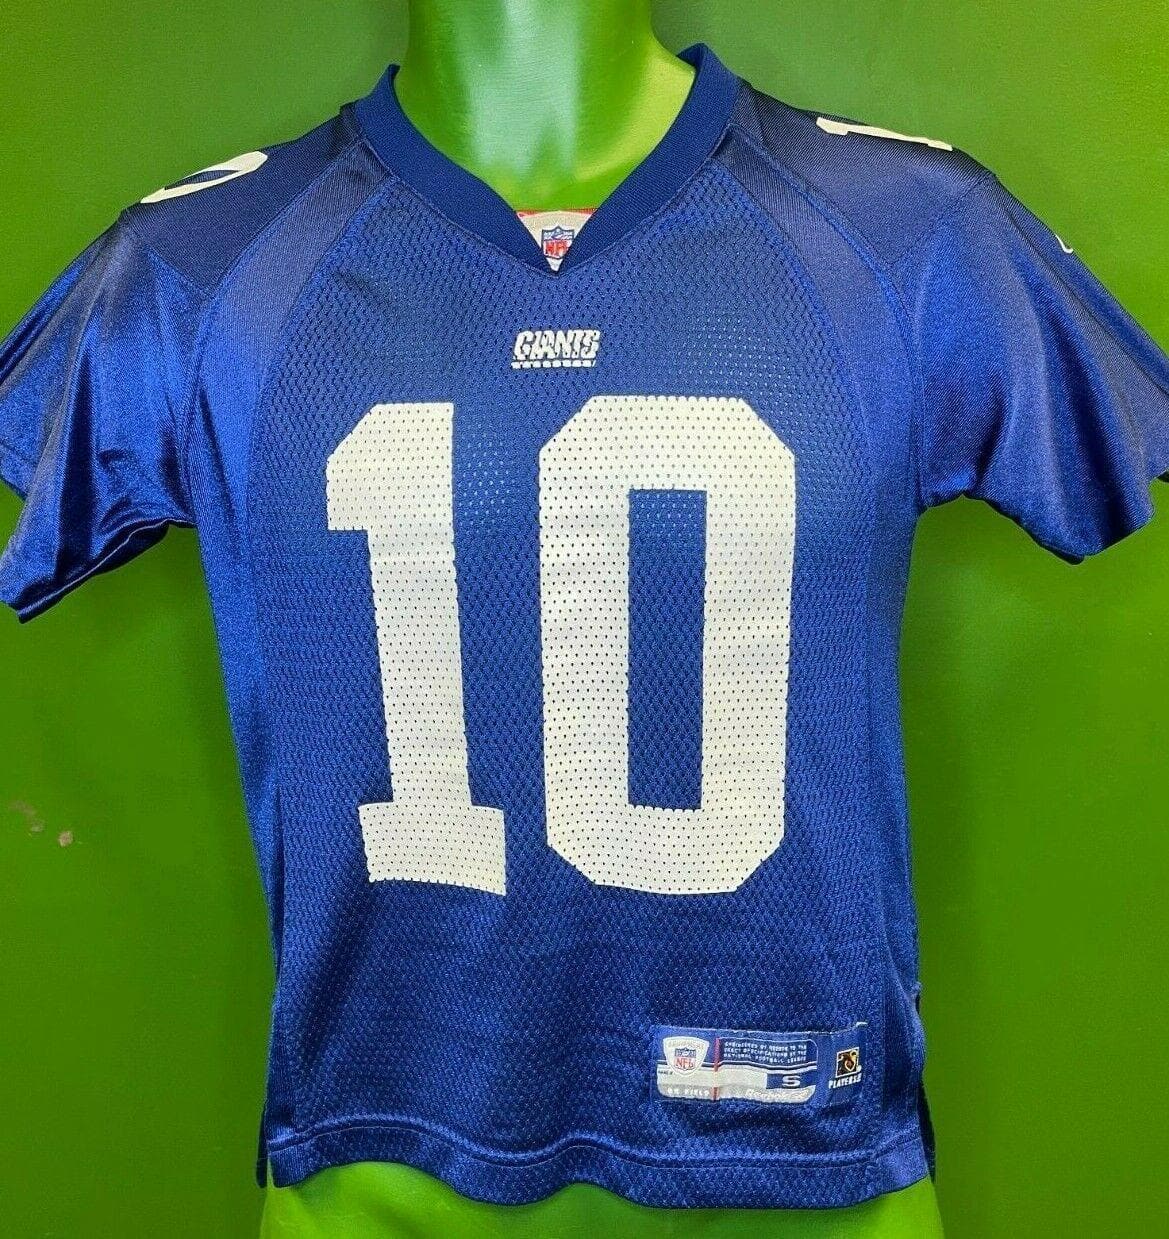 NFL New York Giants Eli Manning #10 Reebok Jersey Youth Small 8